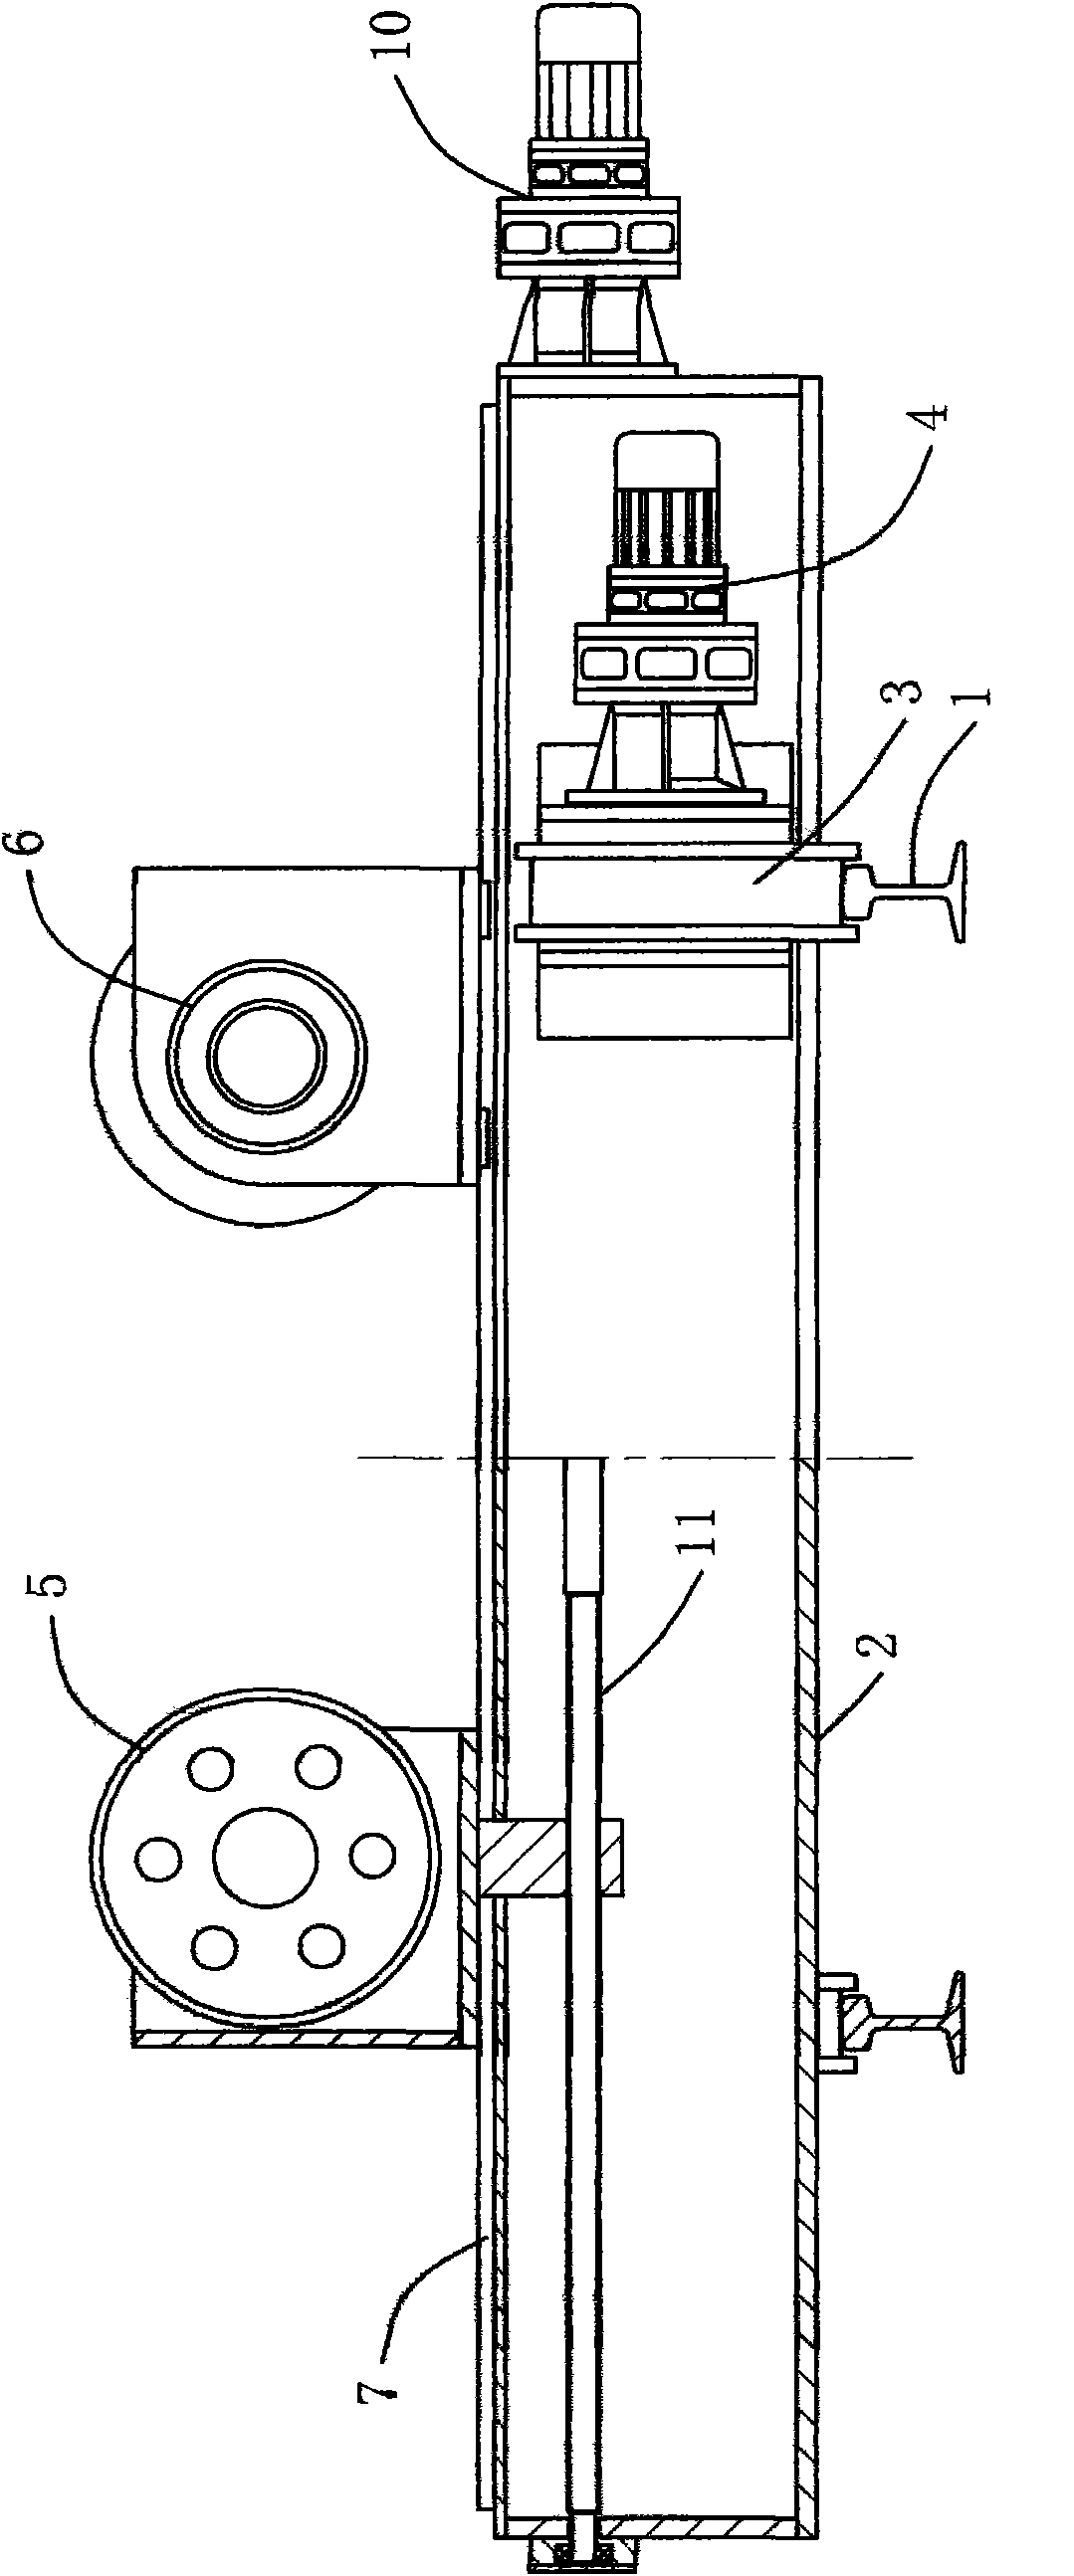 Shell ring assembly device for assembly of tower body of wind power generation iron tower